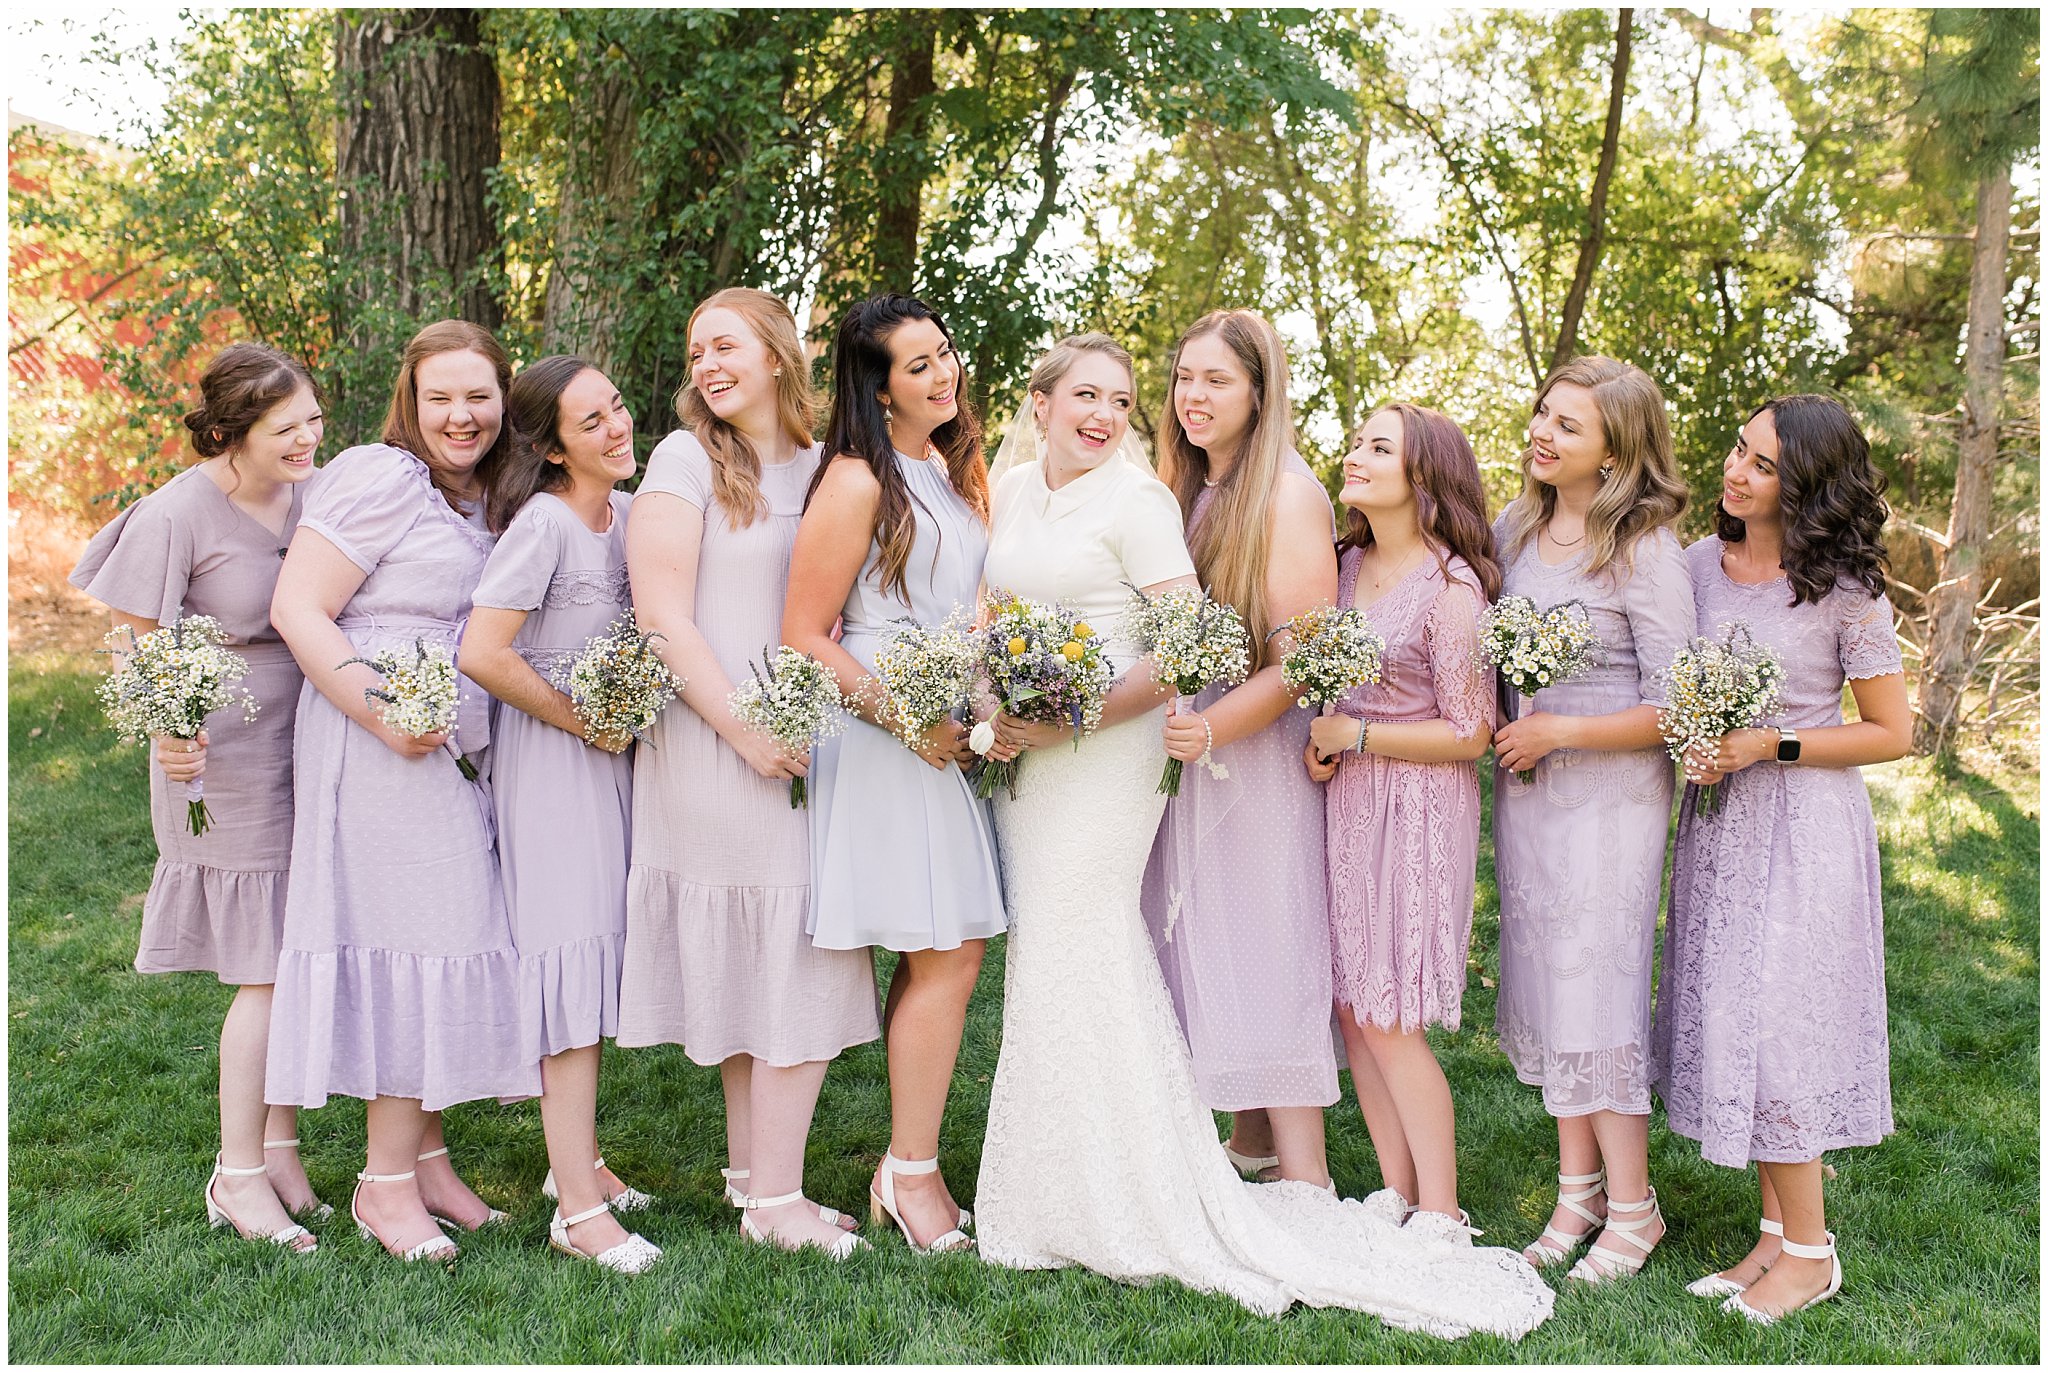 Wedding party in lavender dresses and yellow ties with wildflowers | Fountain View Event Venue and Bountiful Temple Wedding | Jessie and Dallin Photography